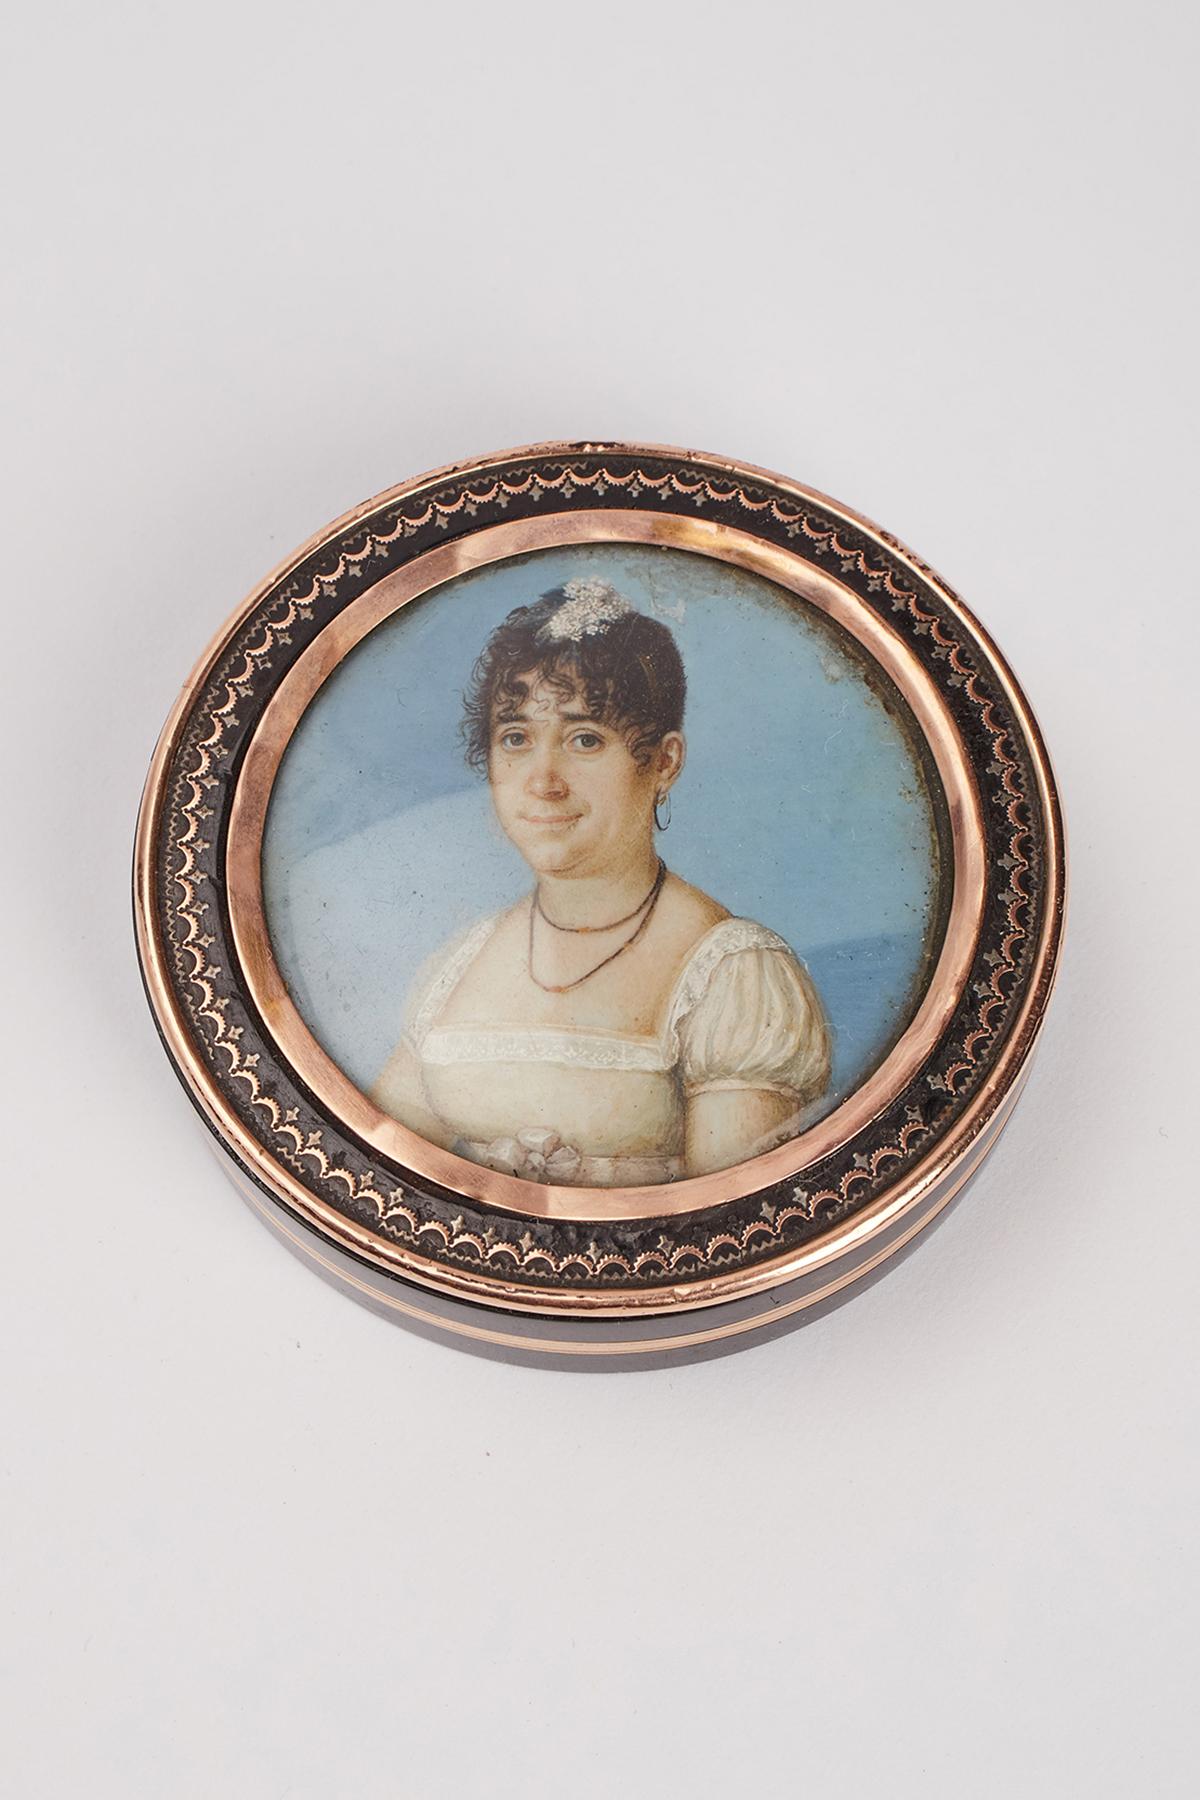 Snuffbox, Musky Agate and 18 K gold. Miniaute watercoulor on ivory depicting a white dressed woman. Tortoise shell gold piquet framed. France, circa 1810. (SHIP TO EU ONLY)